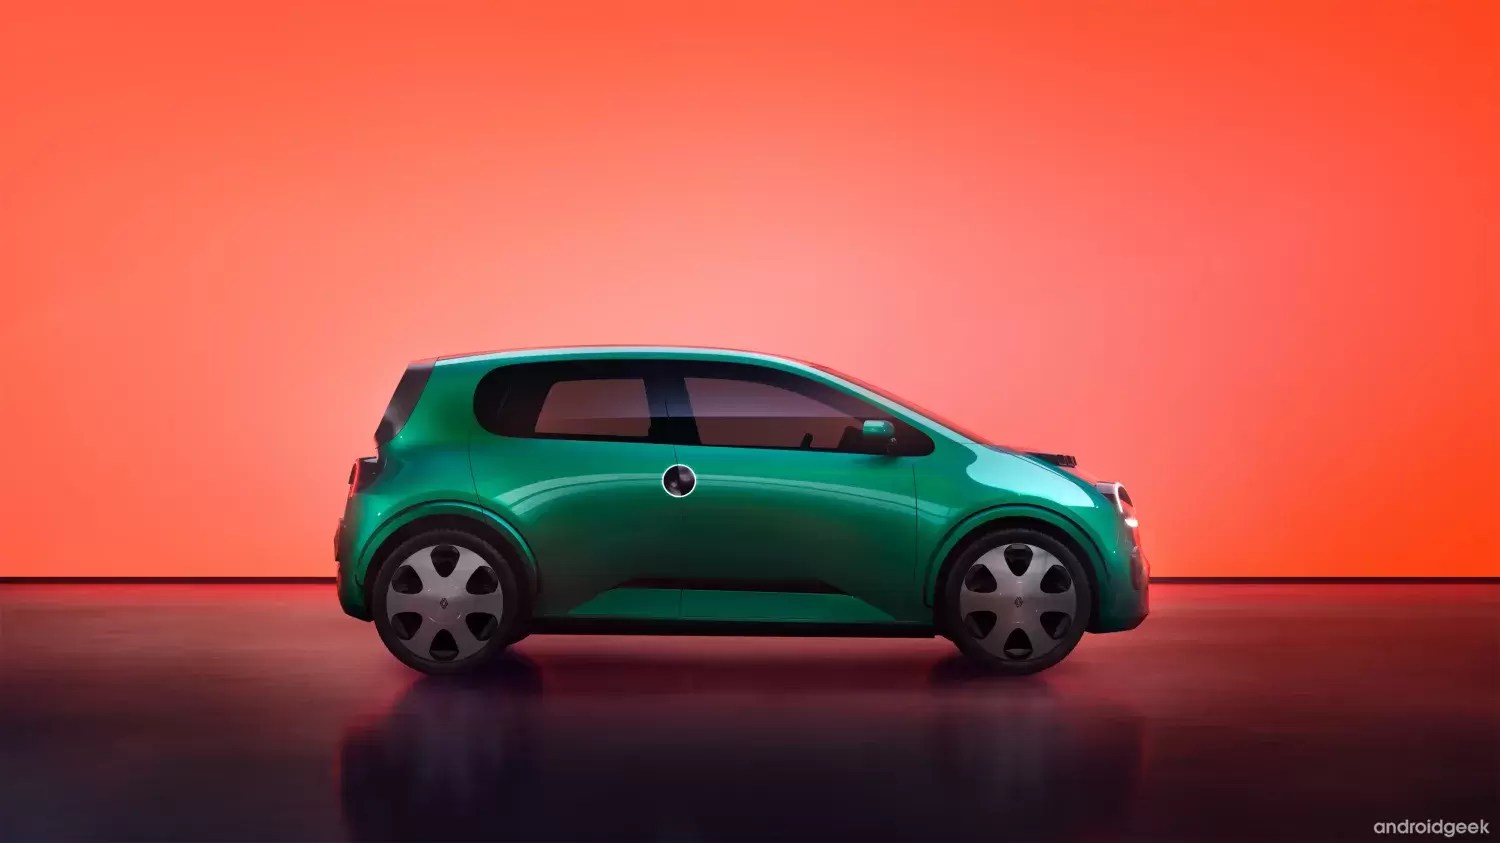 Electric Car Rentals for €40/Month for Low-Income Drivers in France